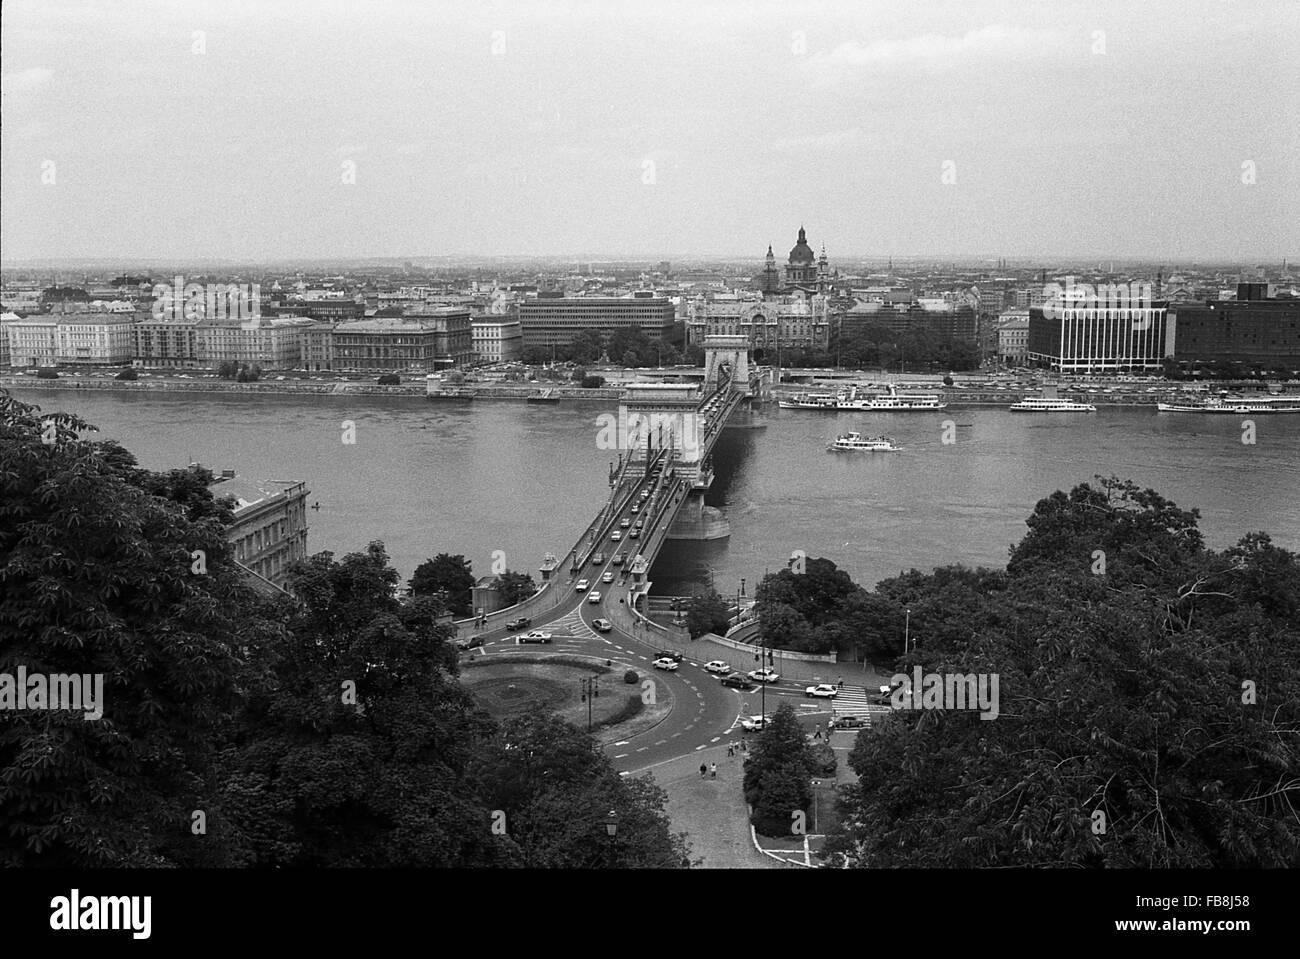 Glance on Bupapest at the time of the Nineties. -  1990  -  Hungary / Budapest  -  Glance on Bupapest at the time of the Nineties. -  Overview of the Danube river, the Chains Bridge from the Buda Castle.   -  Philippe Gras / Le Pictorium Stock Photo